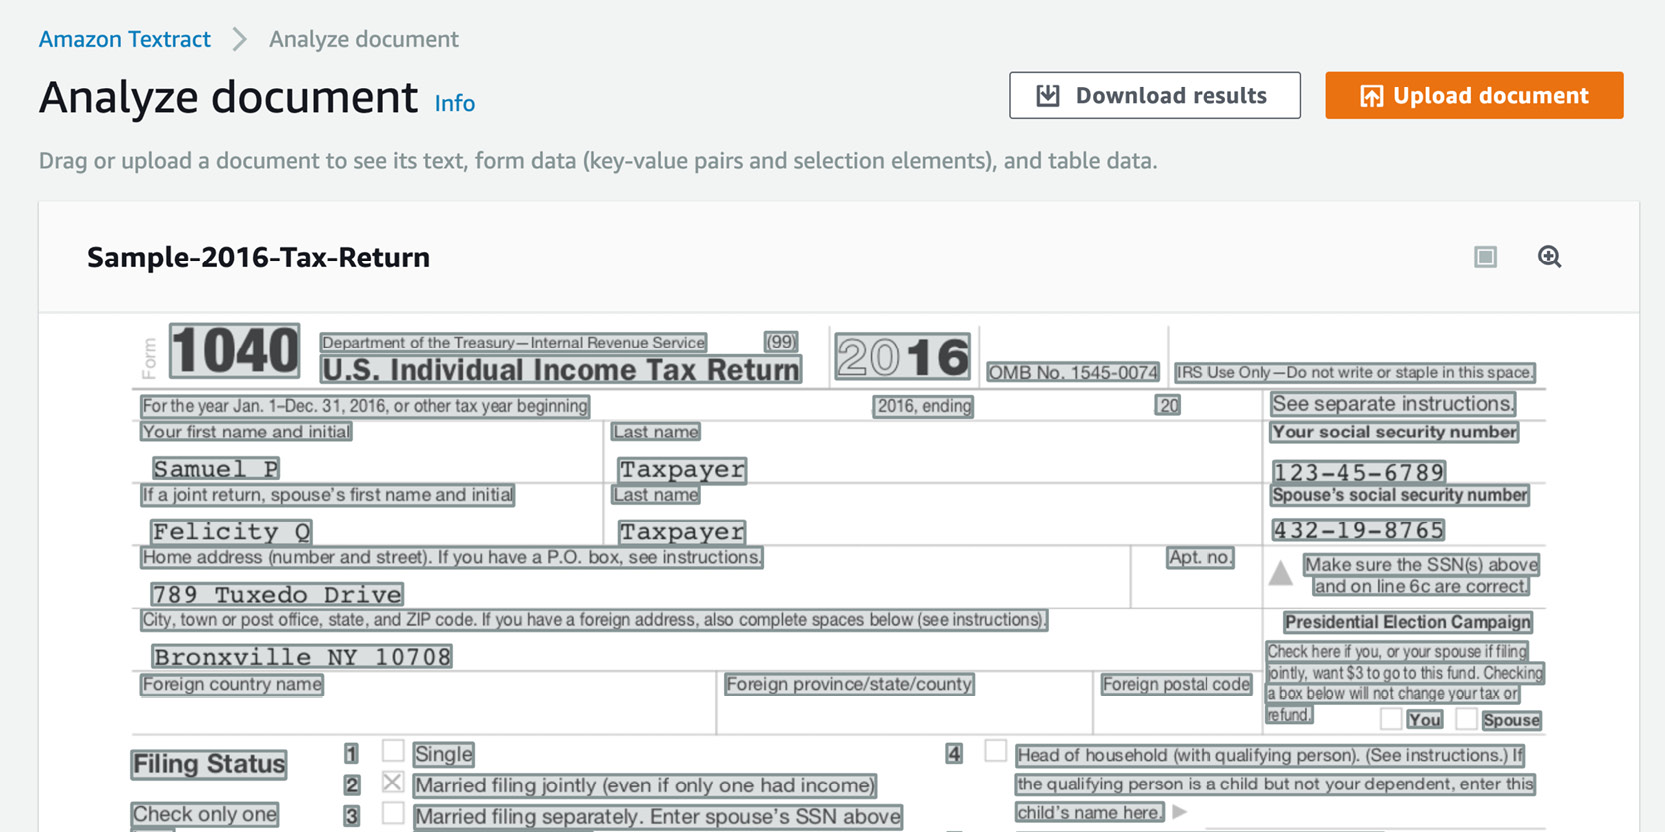 Figure 2.50: Amazon Textract Analyze document screen with the sample tax form
